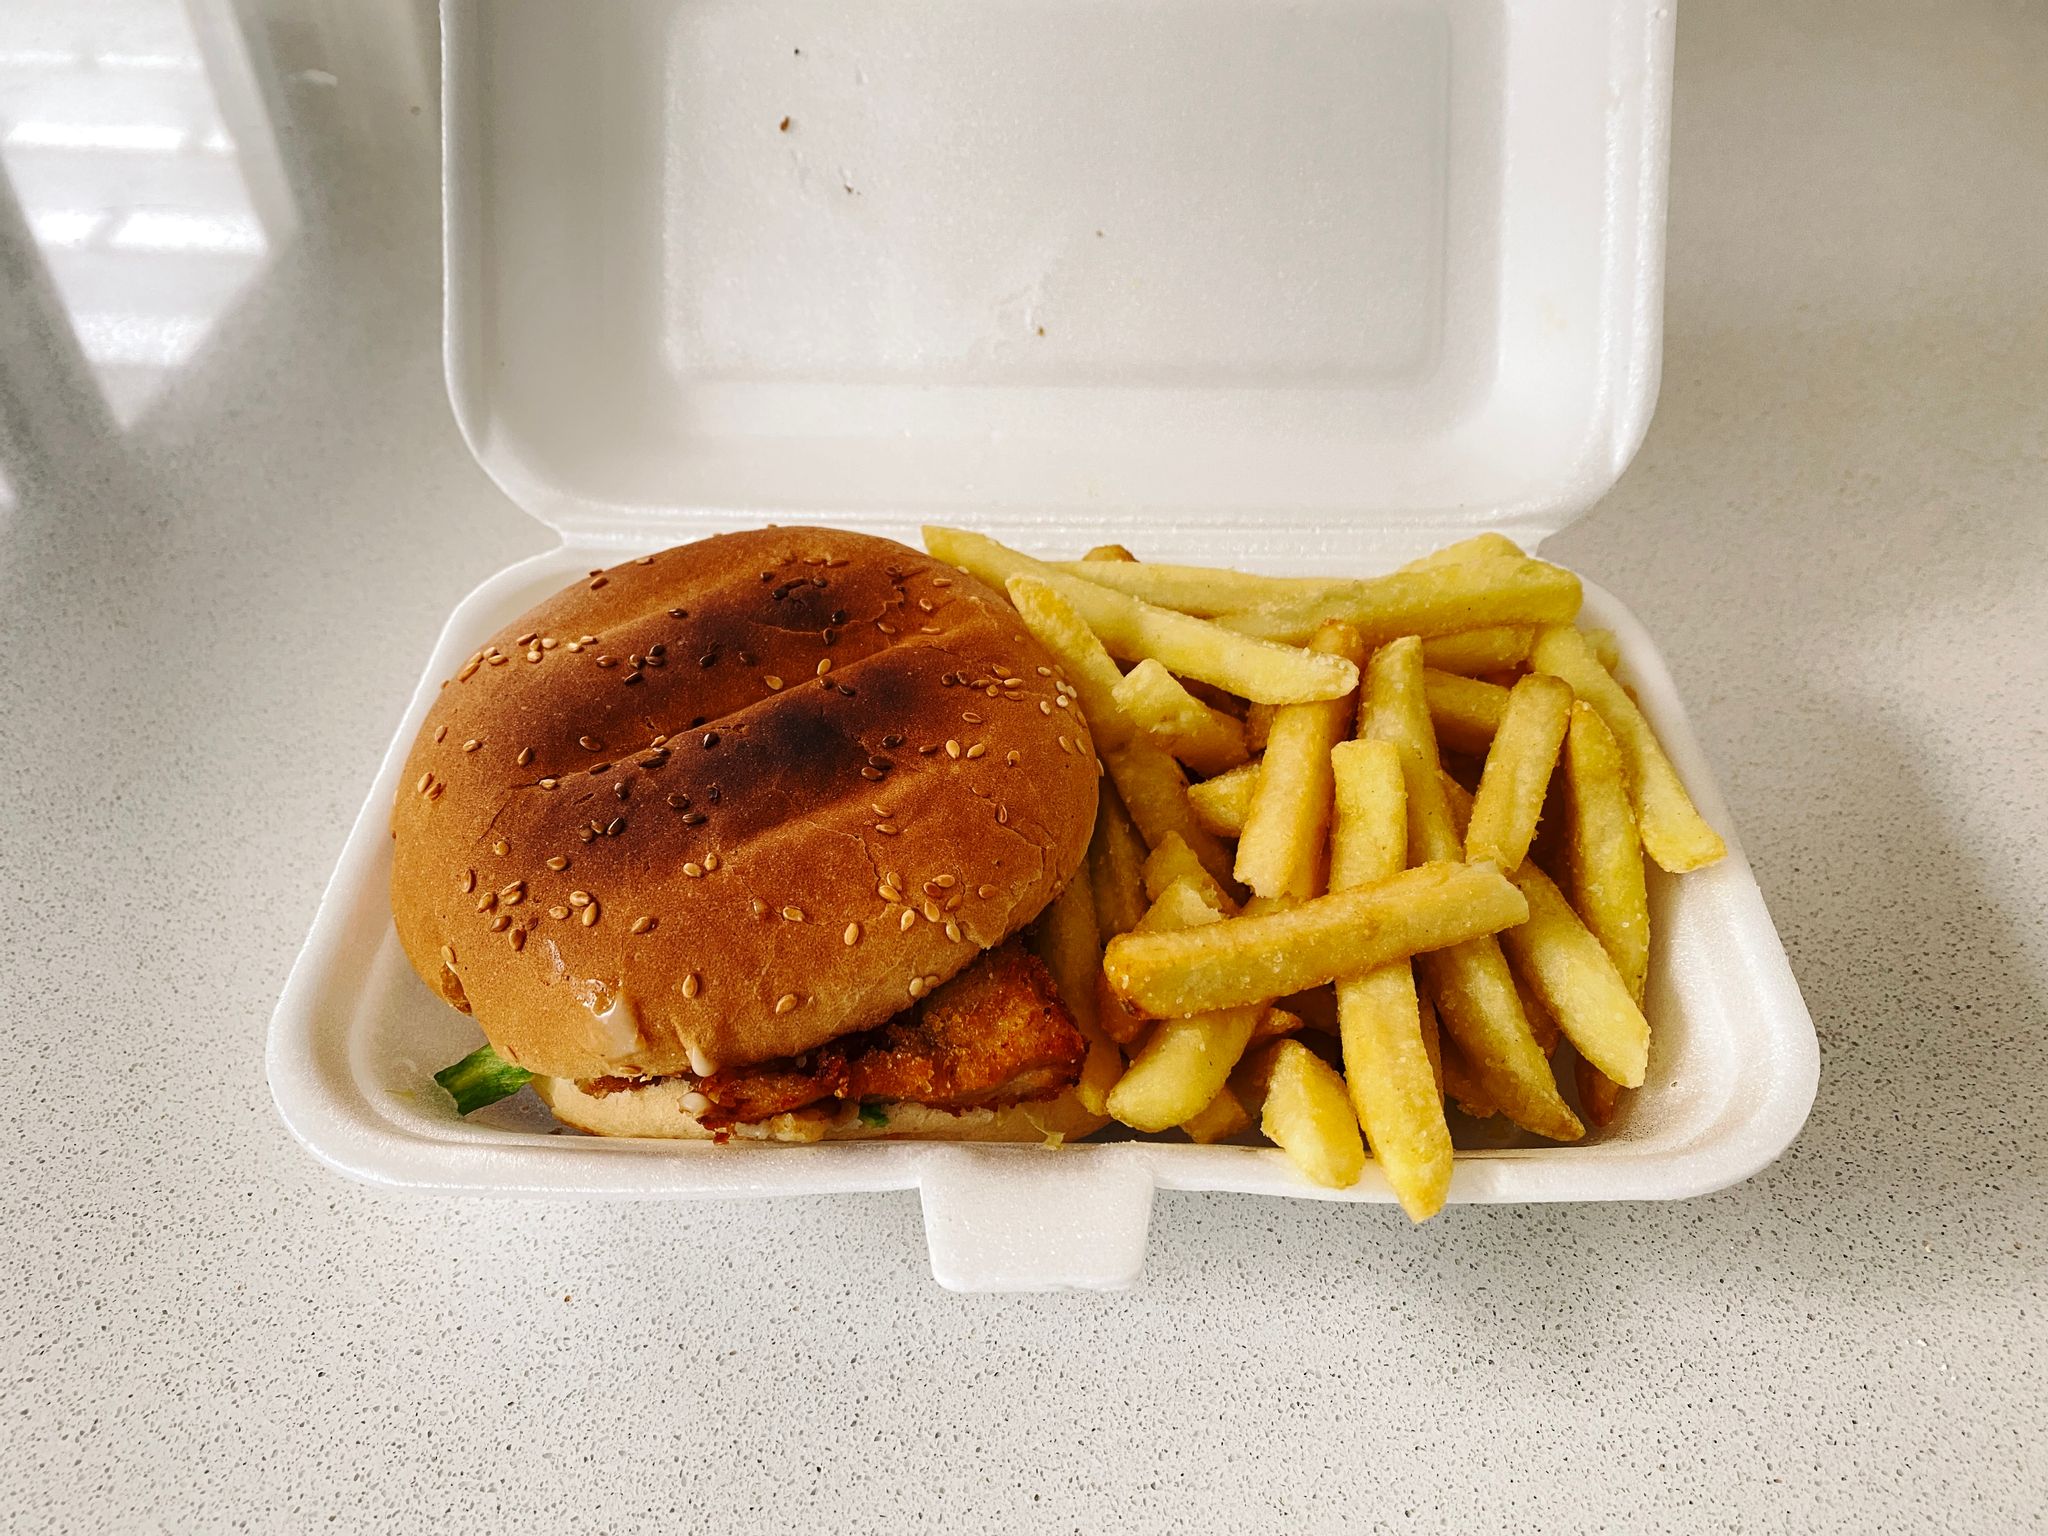 A photo of a chicken burger and chips in a polystyrene takeaway food container.